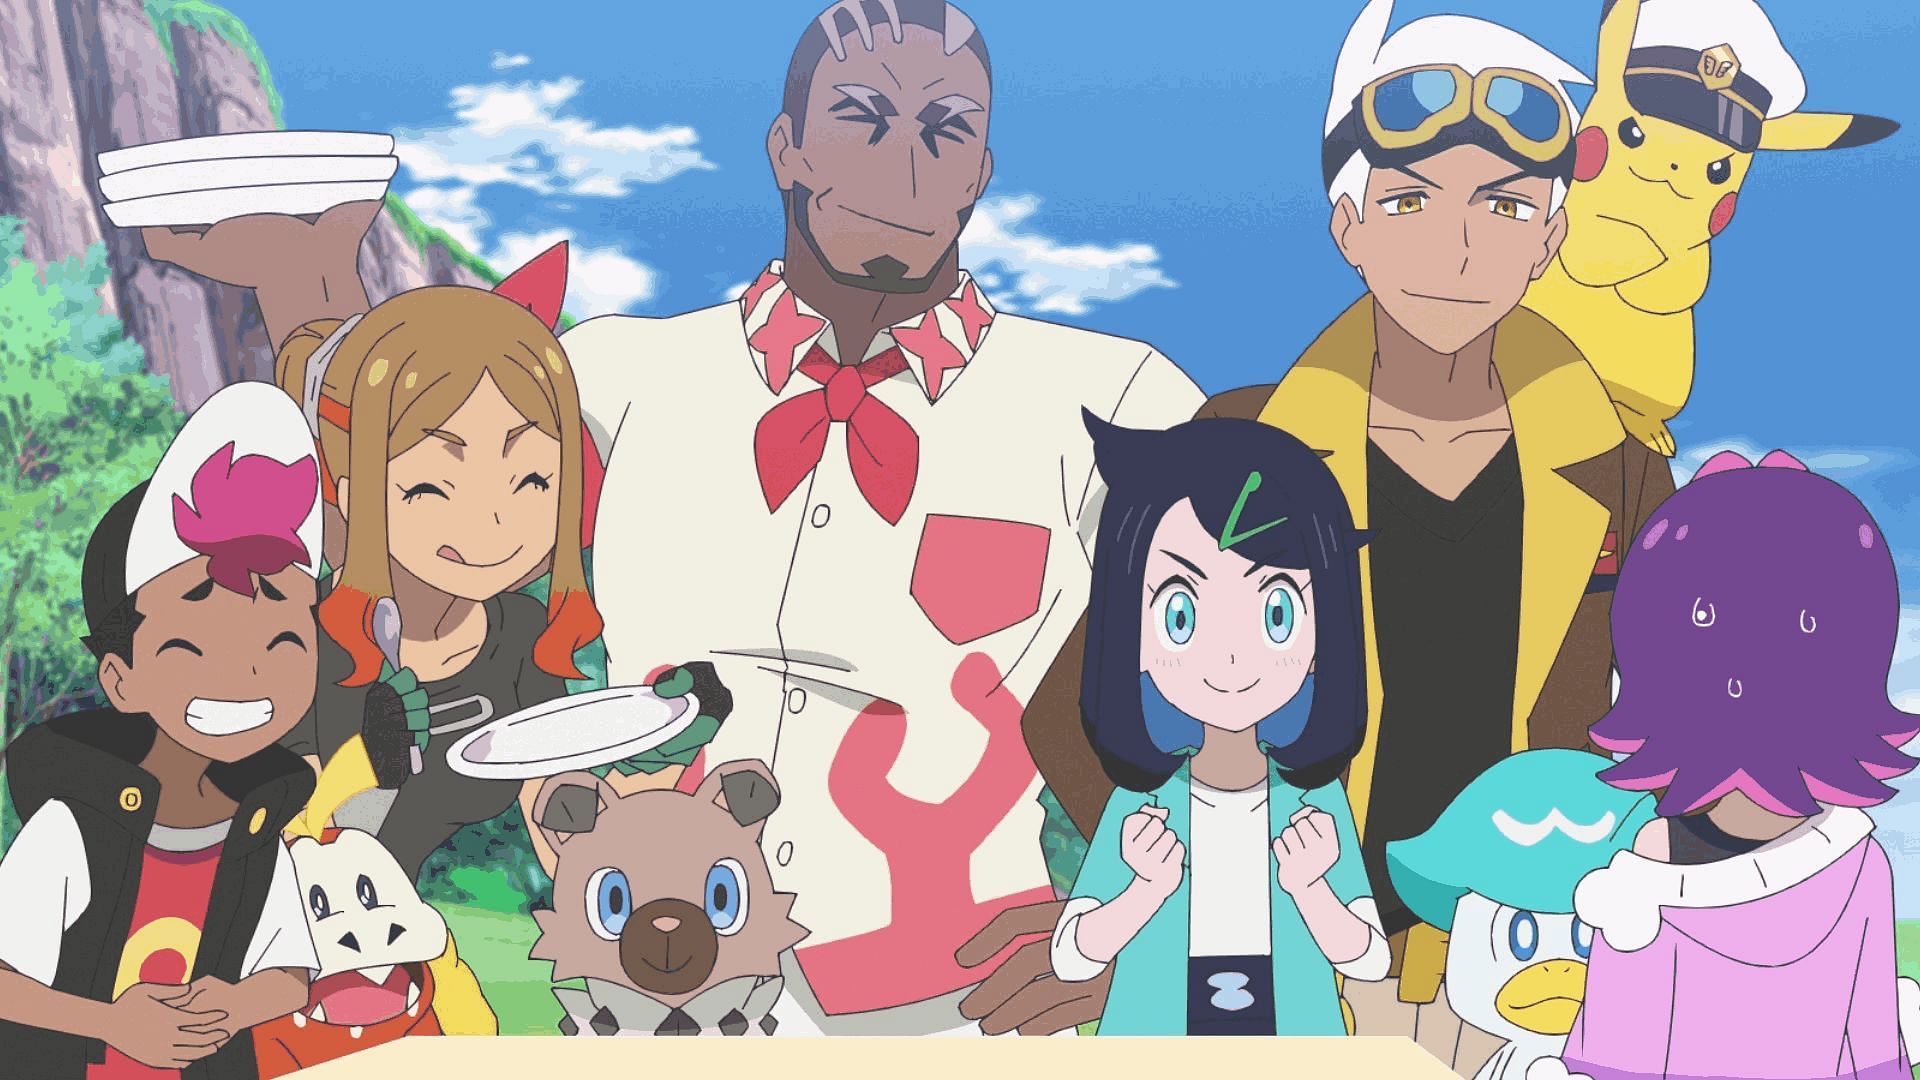 Pokemon Horizons Episode 27: Release date, where to watch, preview, and more